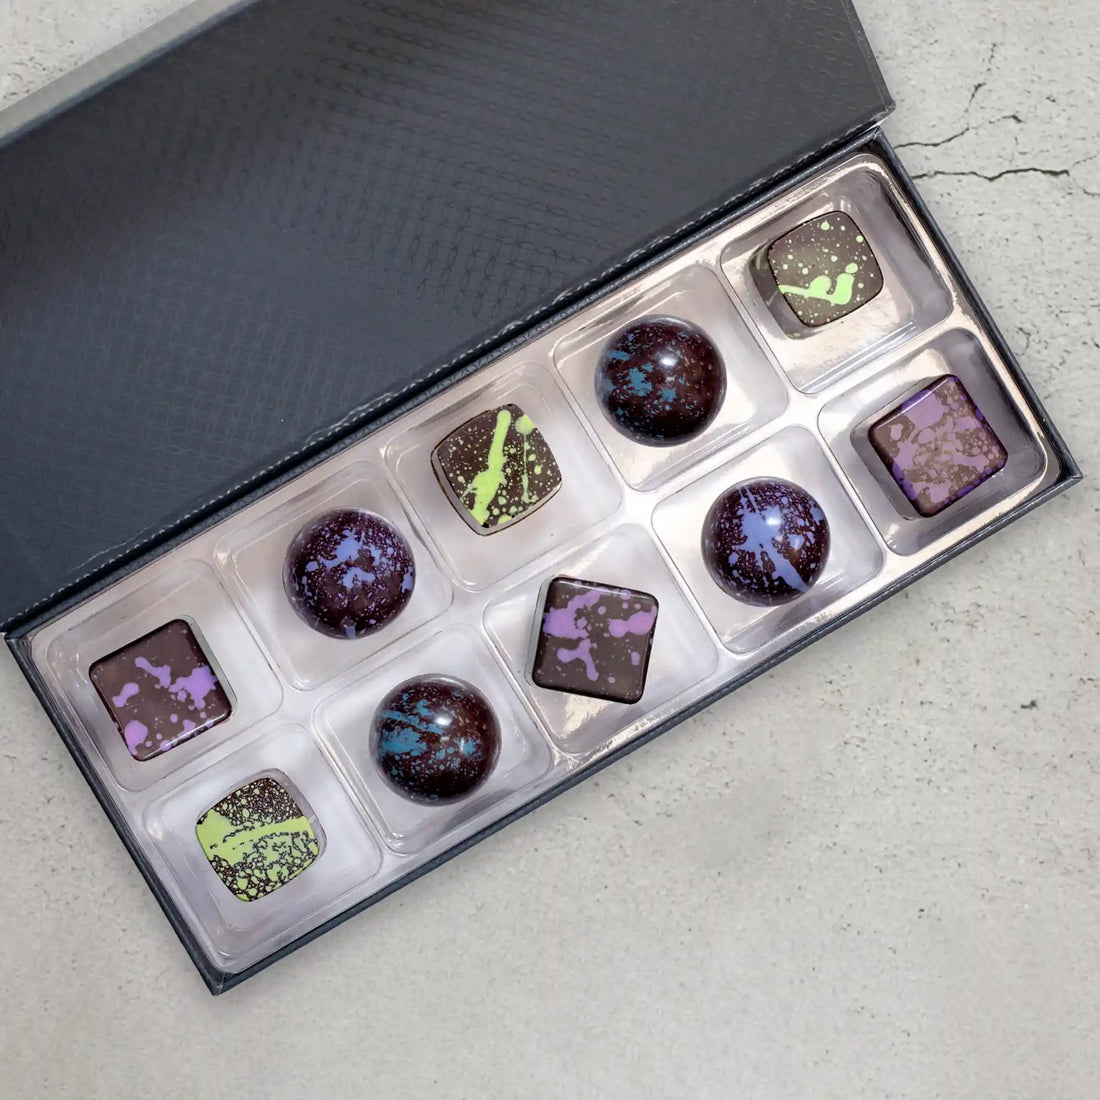 10-Piece Elite Collection Gift Box with custom assortment of dark chocolate bonbons splattered with green, blue, and purple